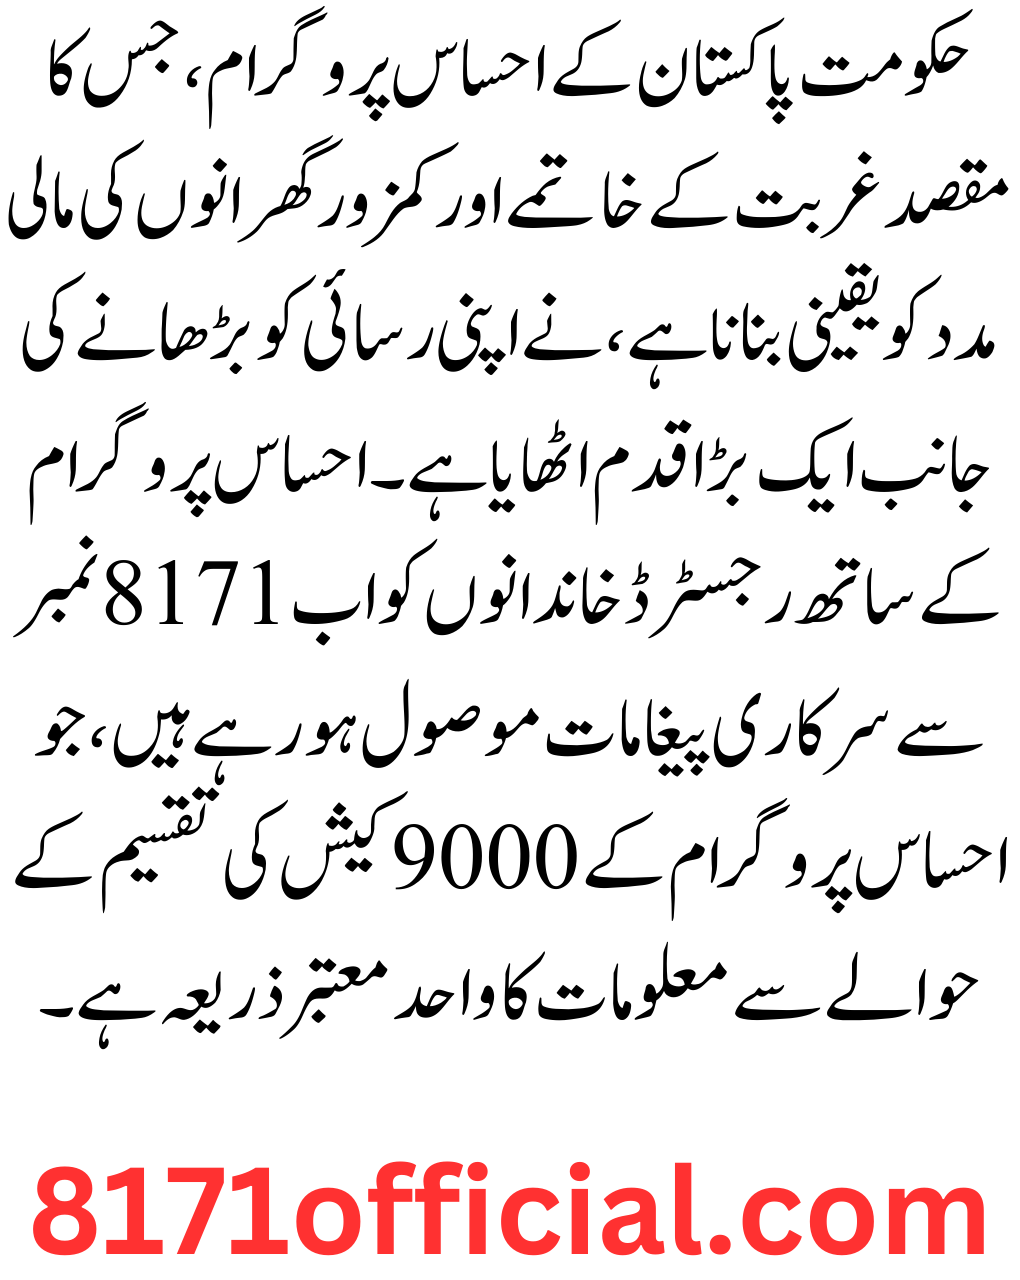 Families Start Receiving Messages from 8171 Ehsaas for 9000 Cash